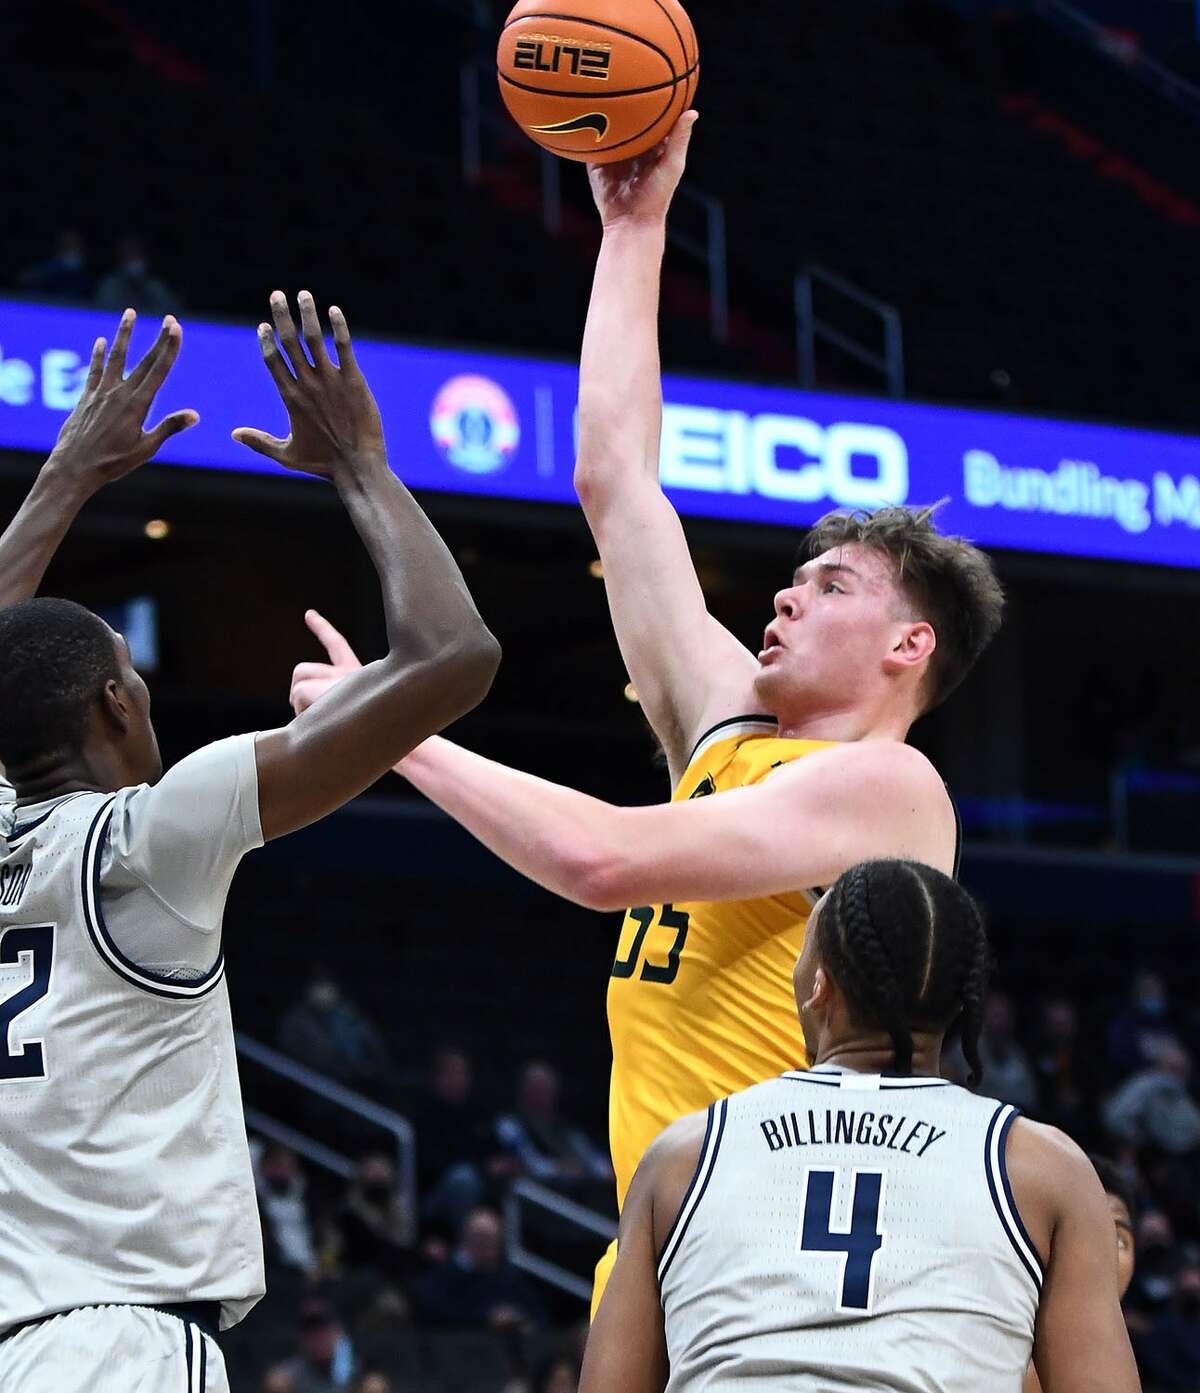 Siena's Jackson Stormo puts up a shot against Georgetown on Saturday in their game on Friday, Nov. 19, 2021 at Capital One Arena in Washington. Stormo had 25 points.